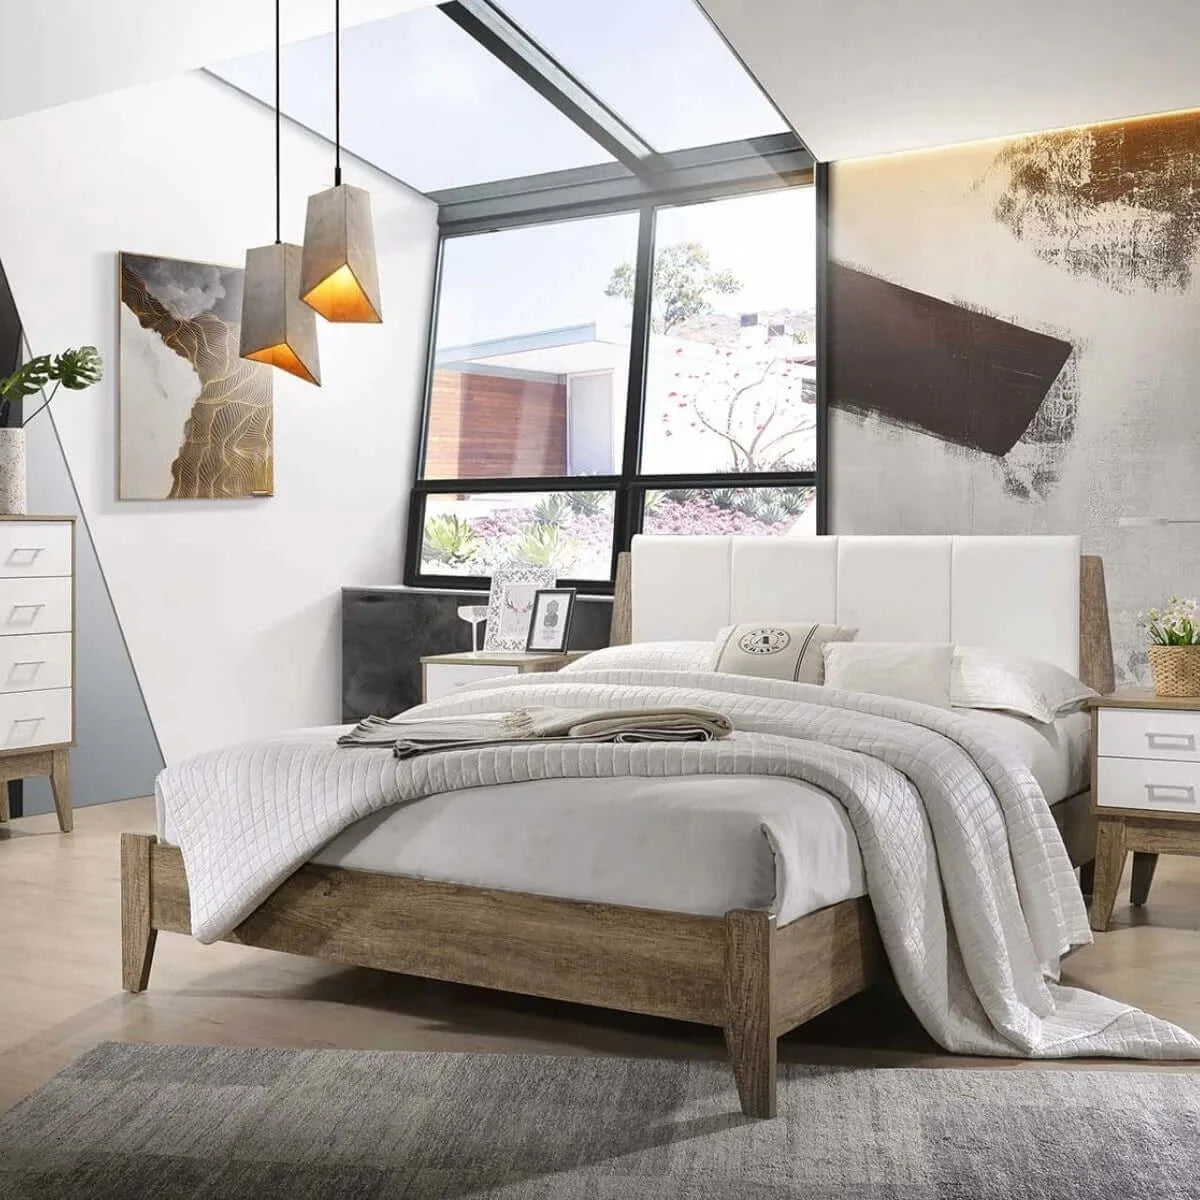 Buy wooden bed frame with leather upholstered bed head size king - upinteriors-Upinteriors